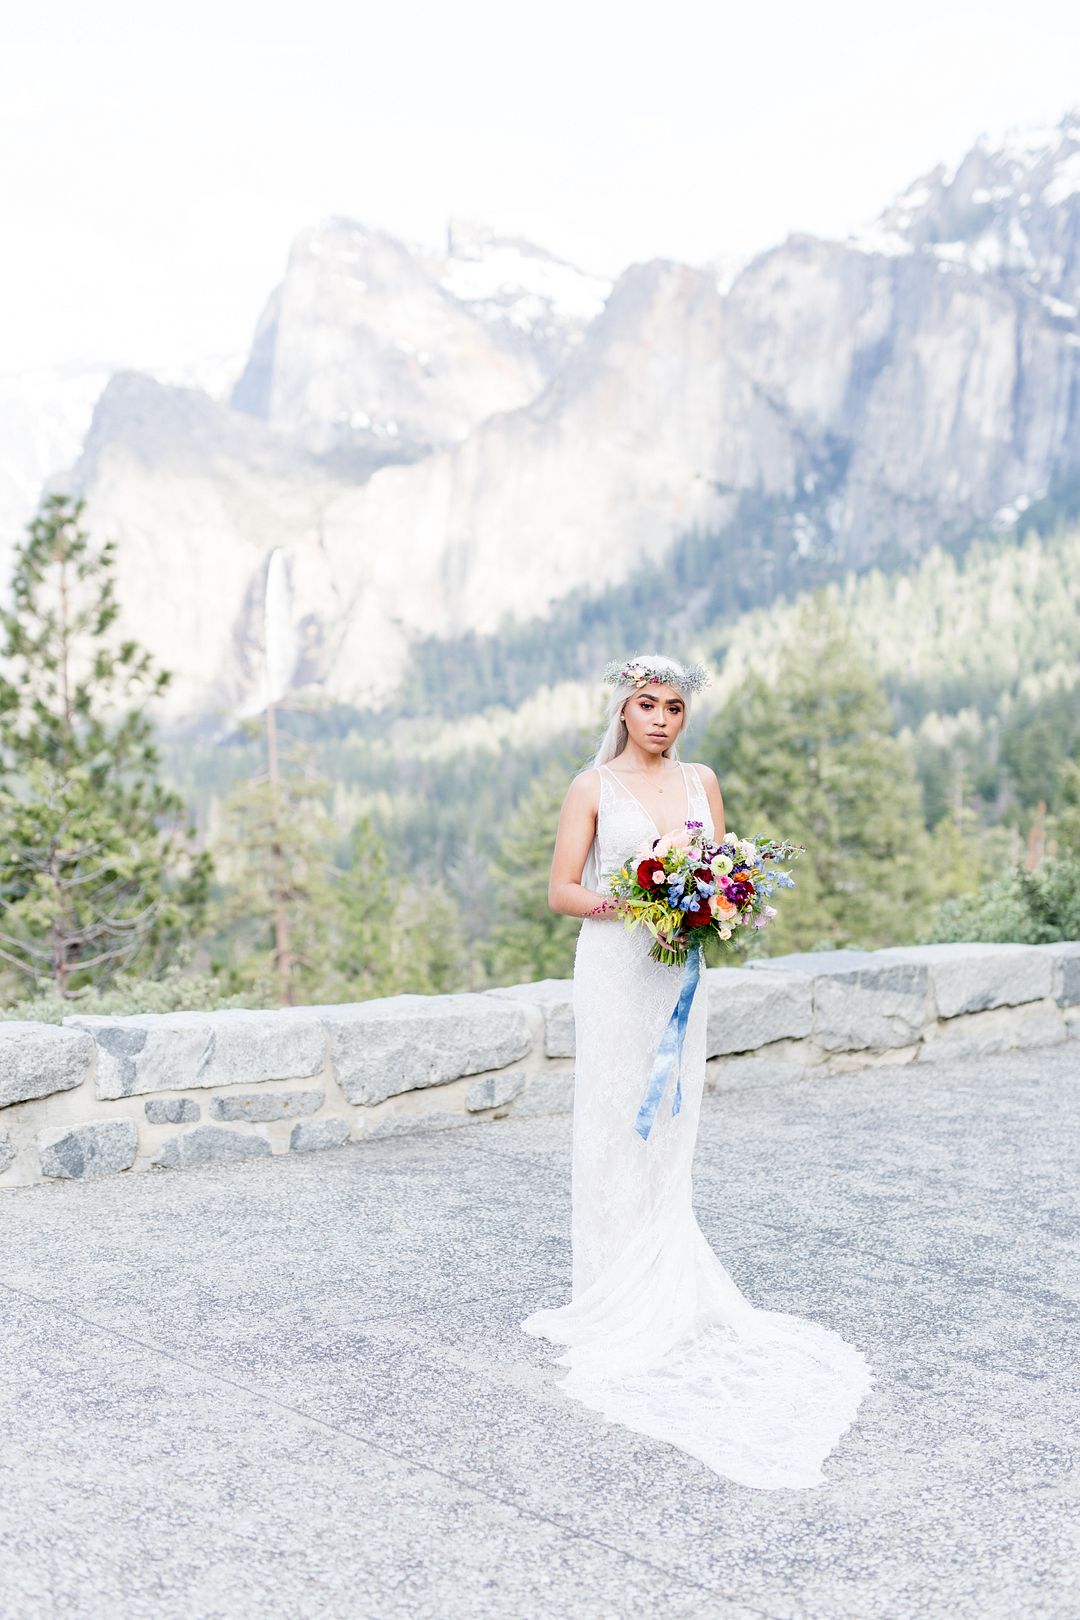 This wedding shoot took place in Yosemite National Park, with lots of bright colors and bold florals